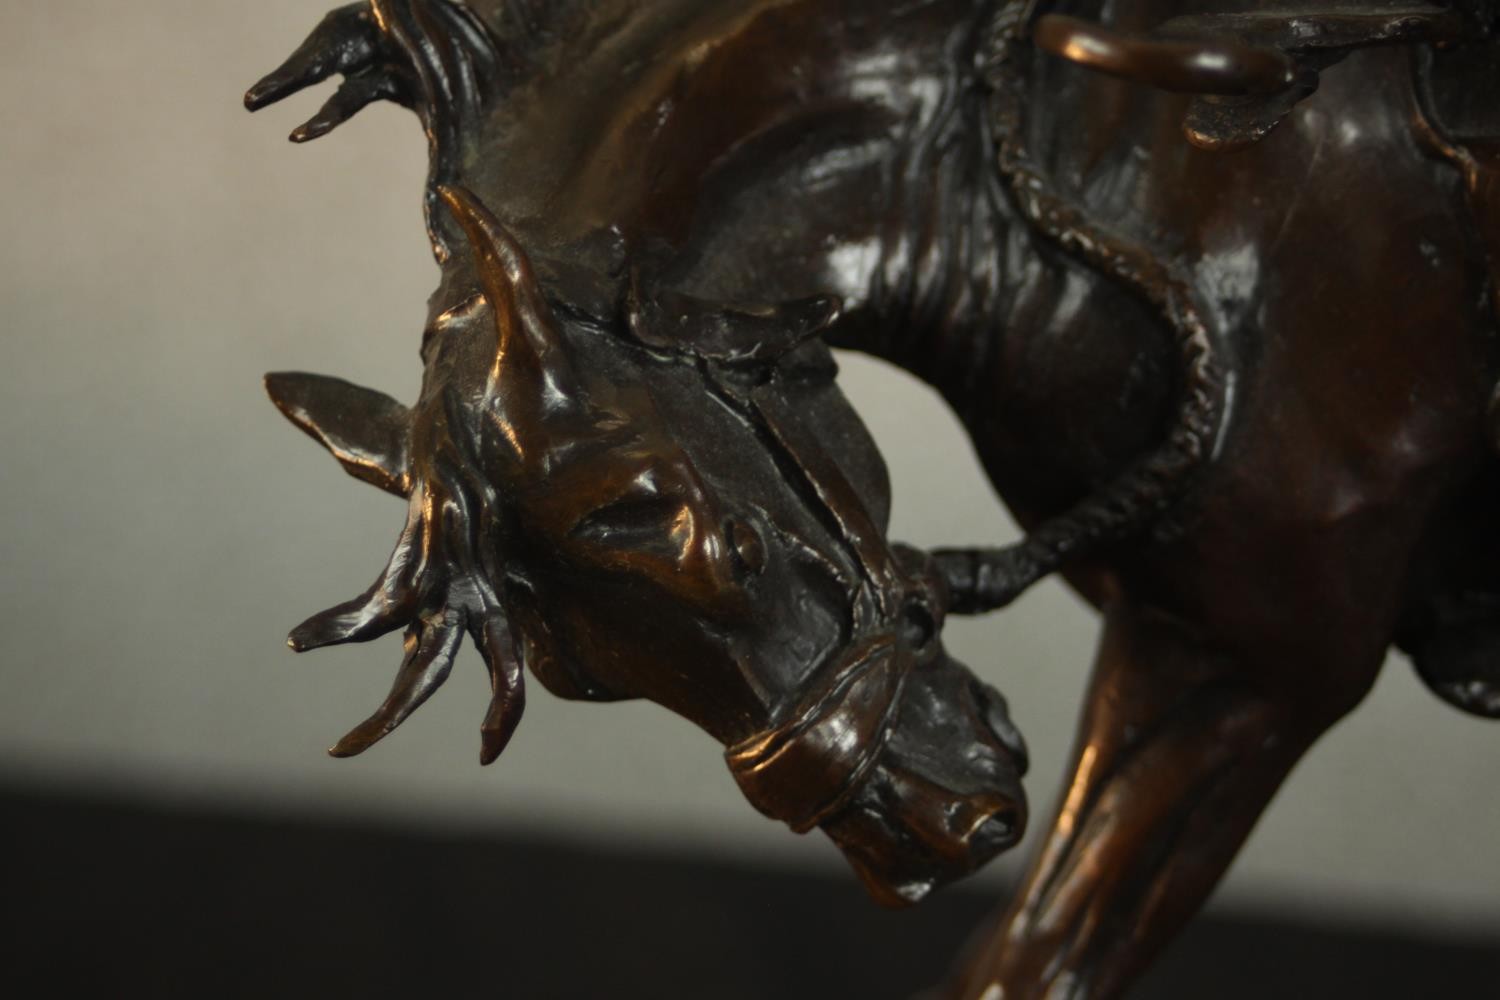 Don Toney, 1954, bronze, 'Riding on the Wrong Side of a Wreck', bucking horse with falling cowboy, - Image 9 of 10